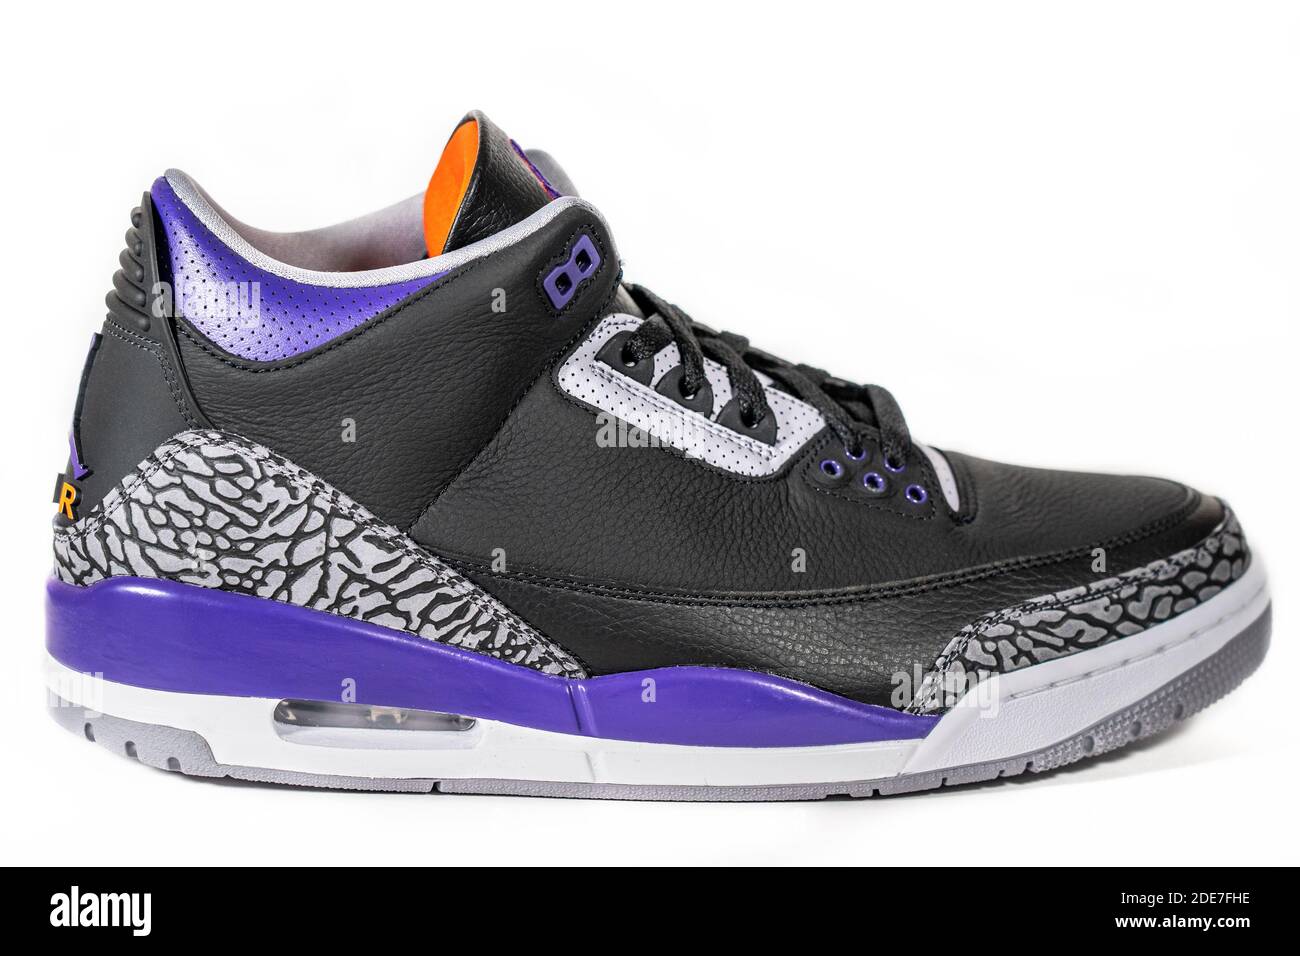 Air Jordan 3 Retro Court Purple - Legendary famous Nike and Jordan Brand  retro basketball sneakers or sport shoes, now fashion and lifestyle shoes :  Moscow, Russia - November 2020 Stock Photo - Alamy